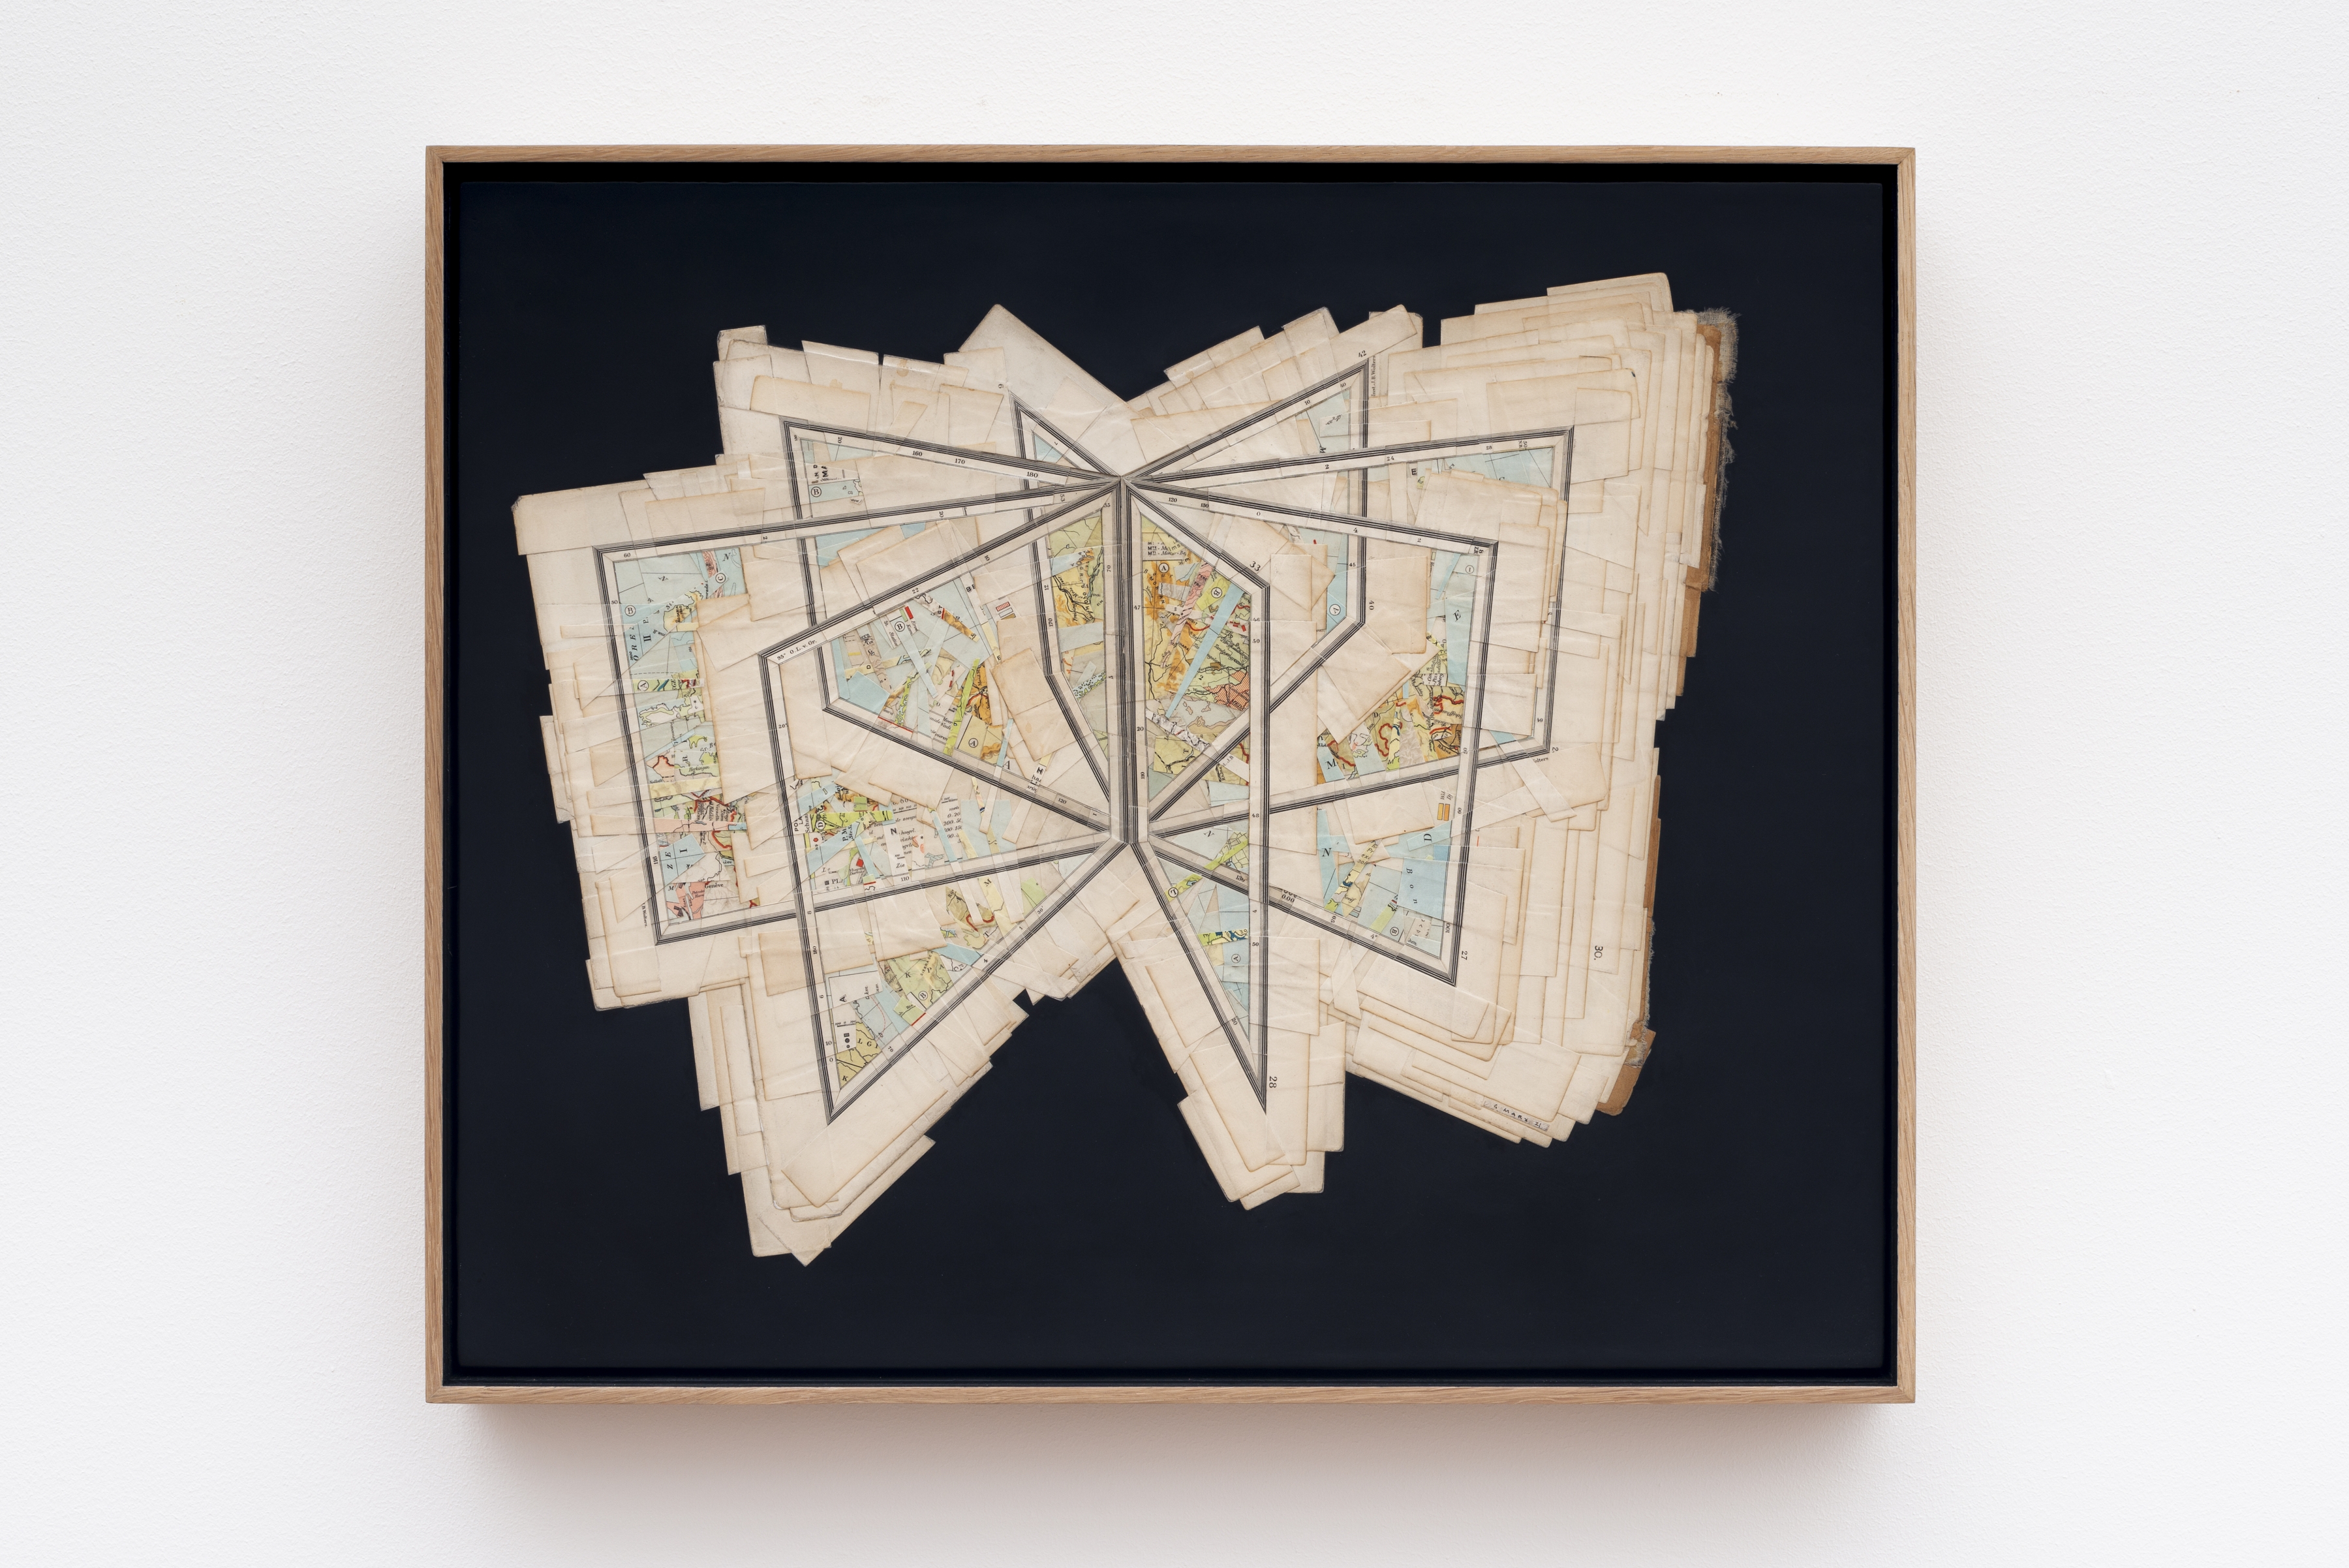 Intersection Cartography, 2021

Reconfigured map fragments on canvas

53 x 63 x 7.5 cm / 20.8 x 24.8 x 3 in

Enquire